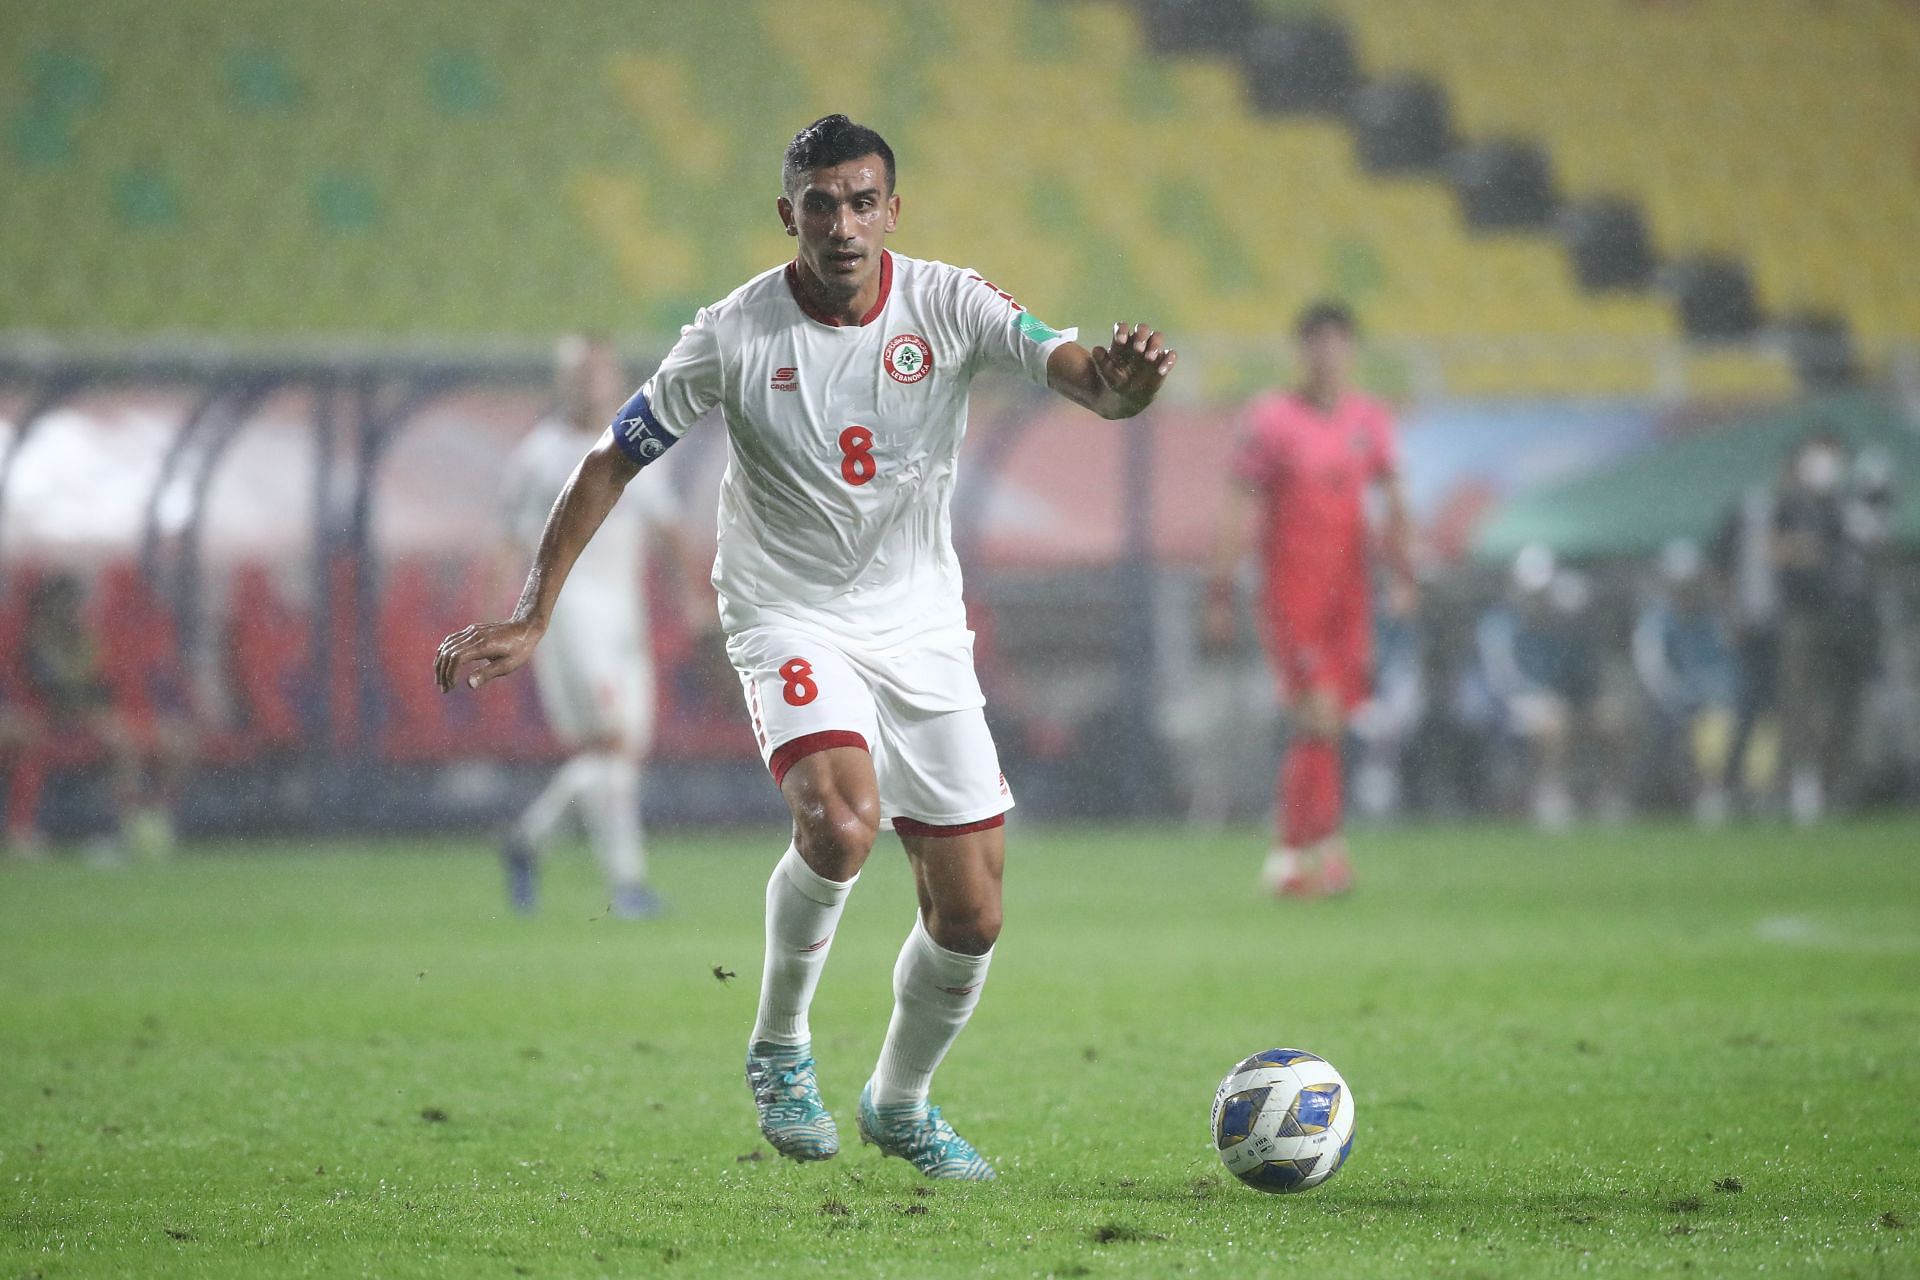 Lebanon and UAE clash in their FIFA World Cup 2022 qualifying fixture on Tuesday